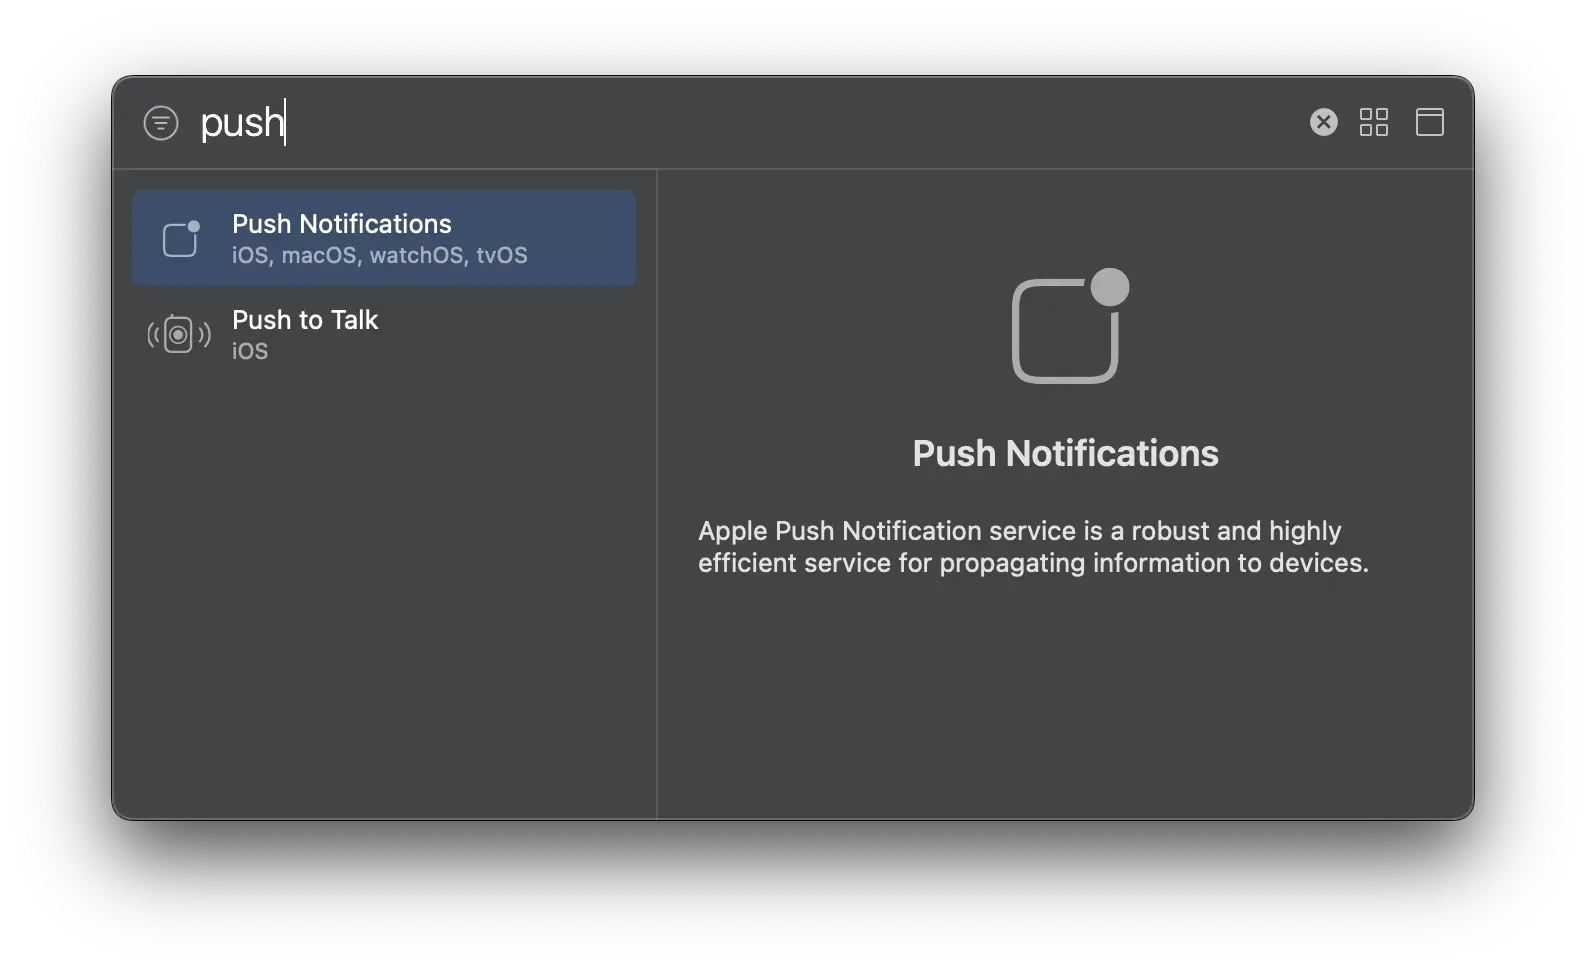 The word push typed into the search bar capabilities and push notifications is a result.